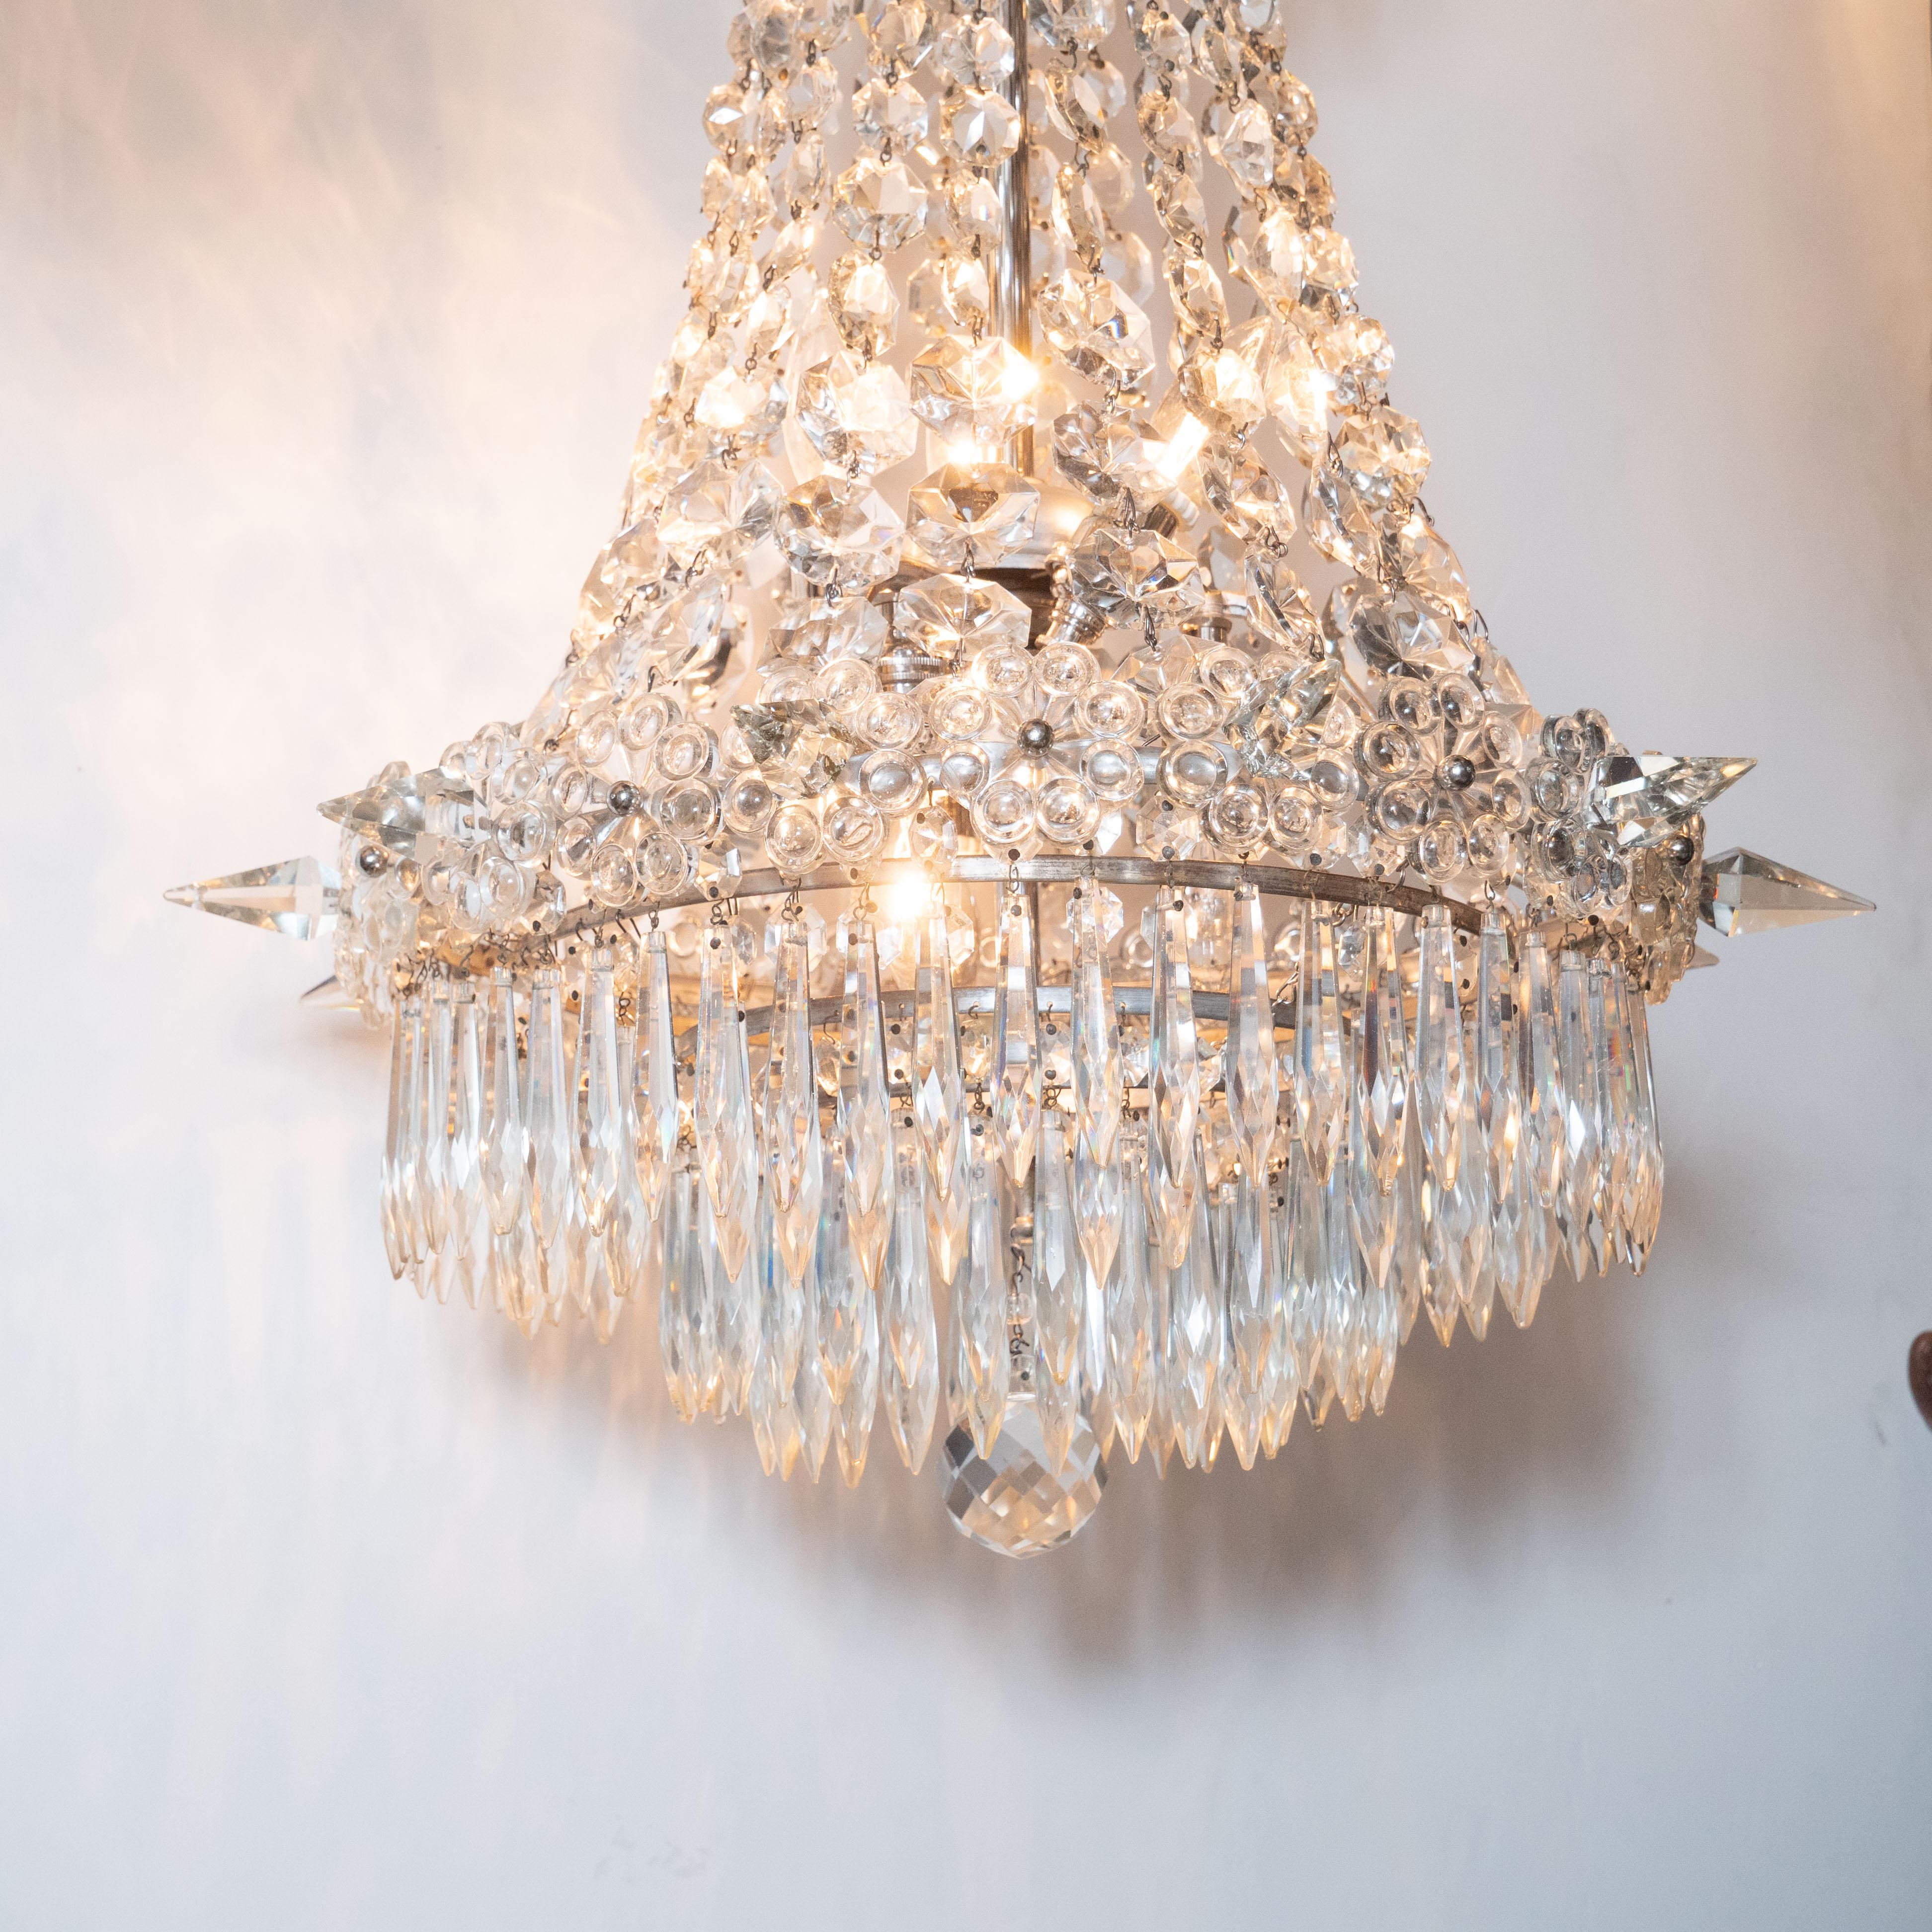 Bronze 1940s Hollywood Regency Cut & Beveled Crystal Chandelier with Silvered Fittings